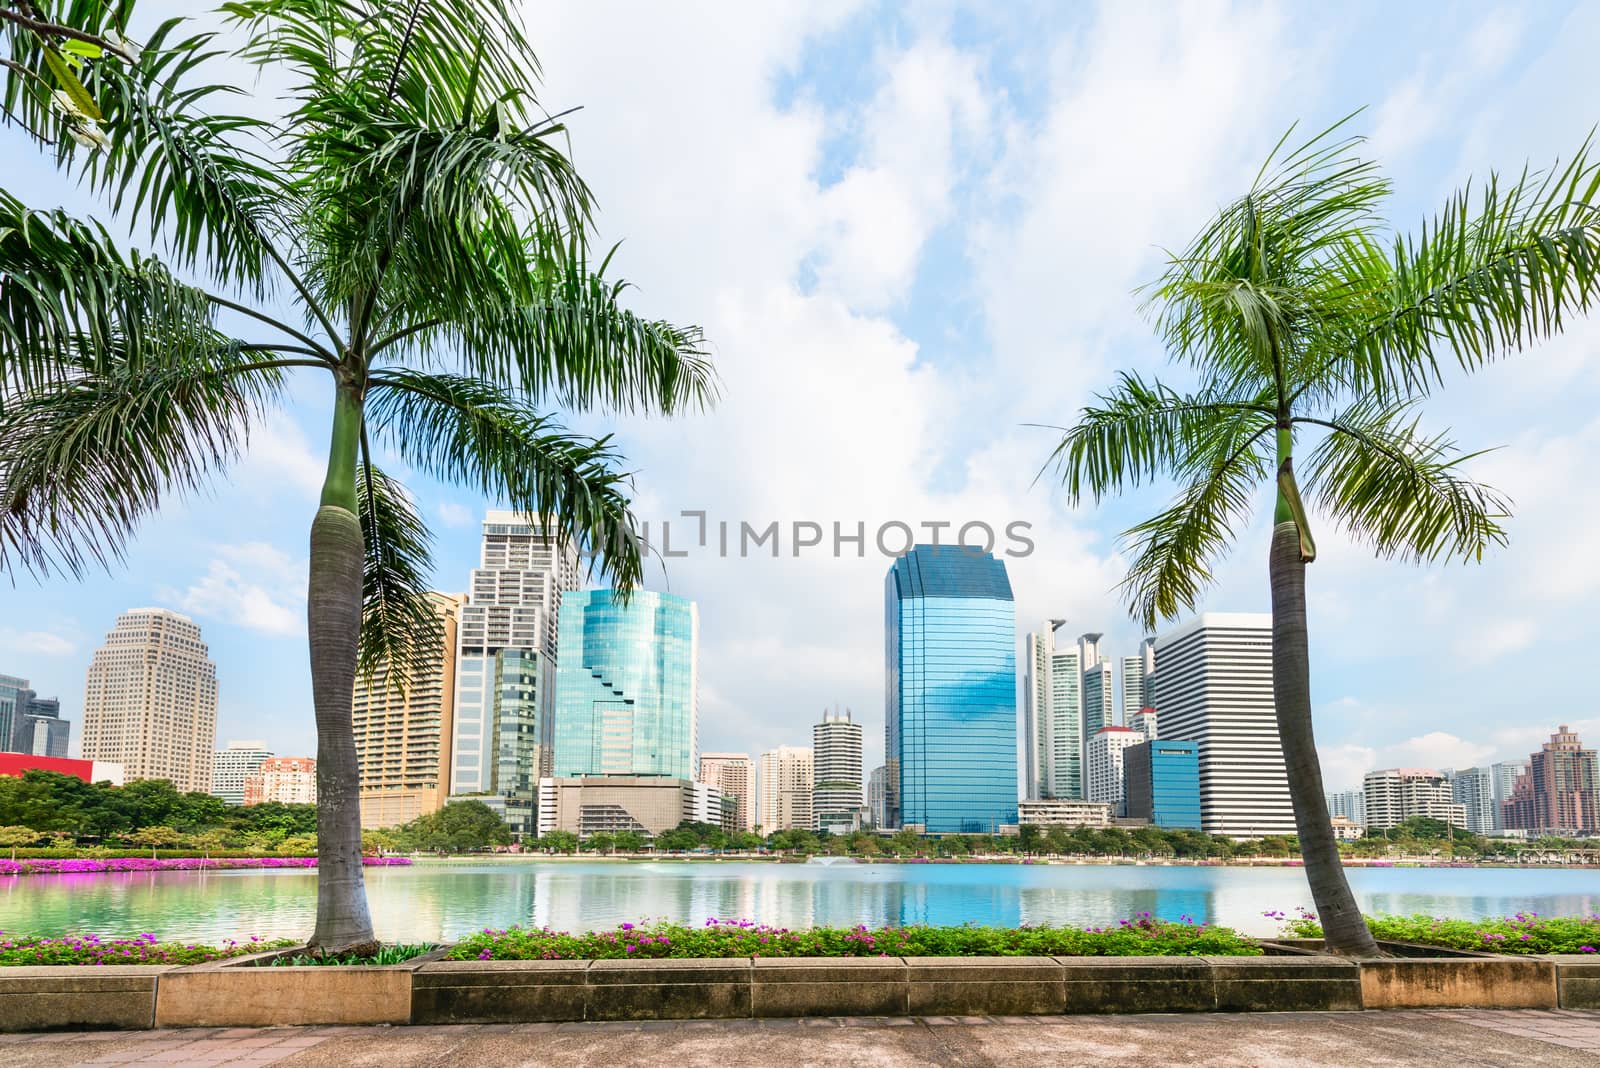 Tropical modern city with palm trees and lake on front by iryna_rasko